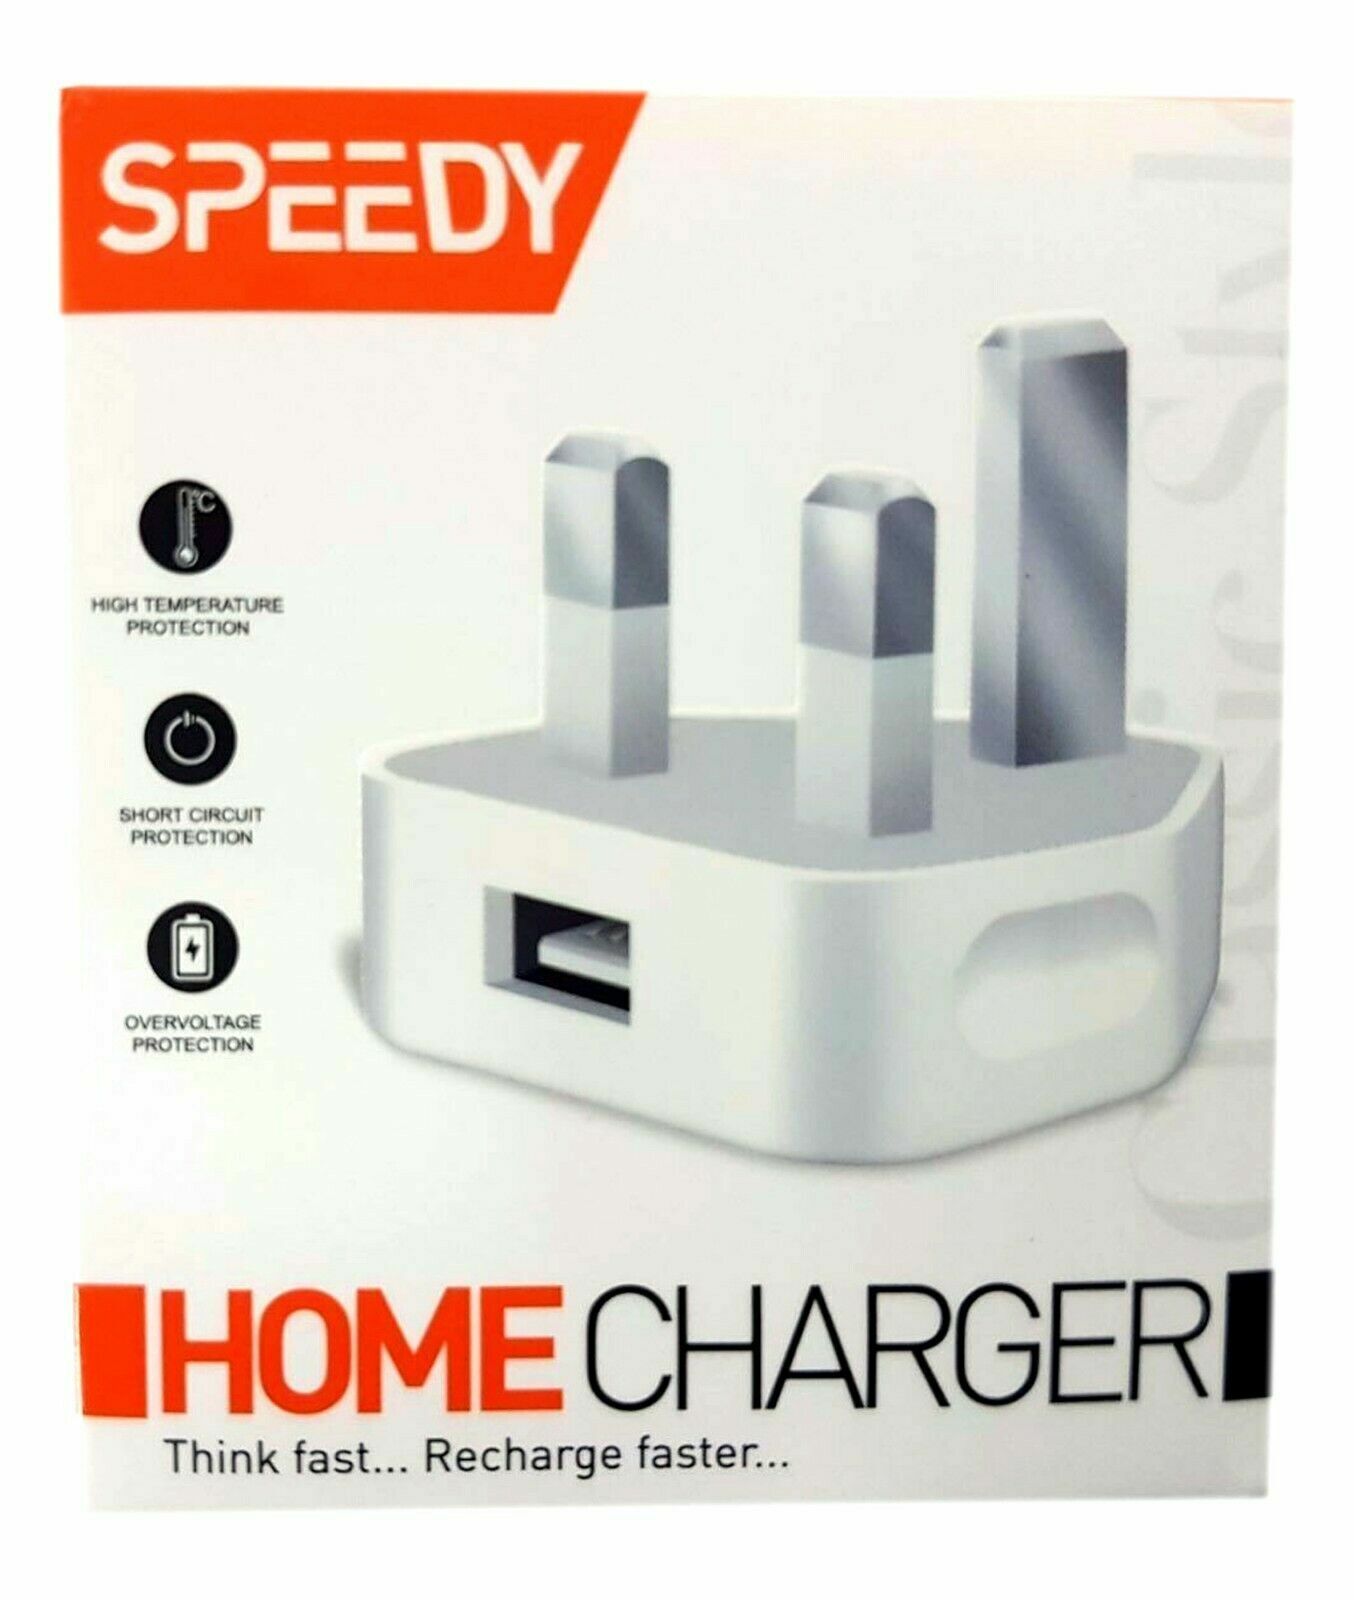 Speedy Fast Charger 1 Port USB Adopter / 3 Pin UK Mains Wall Plug Adapter UK